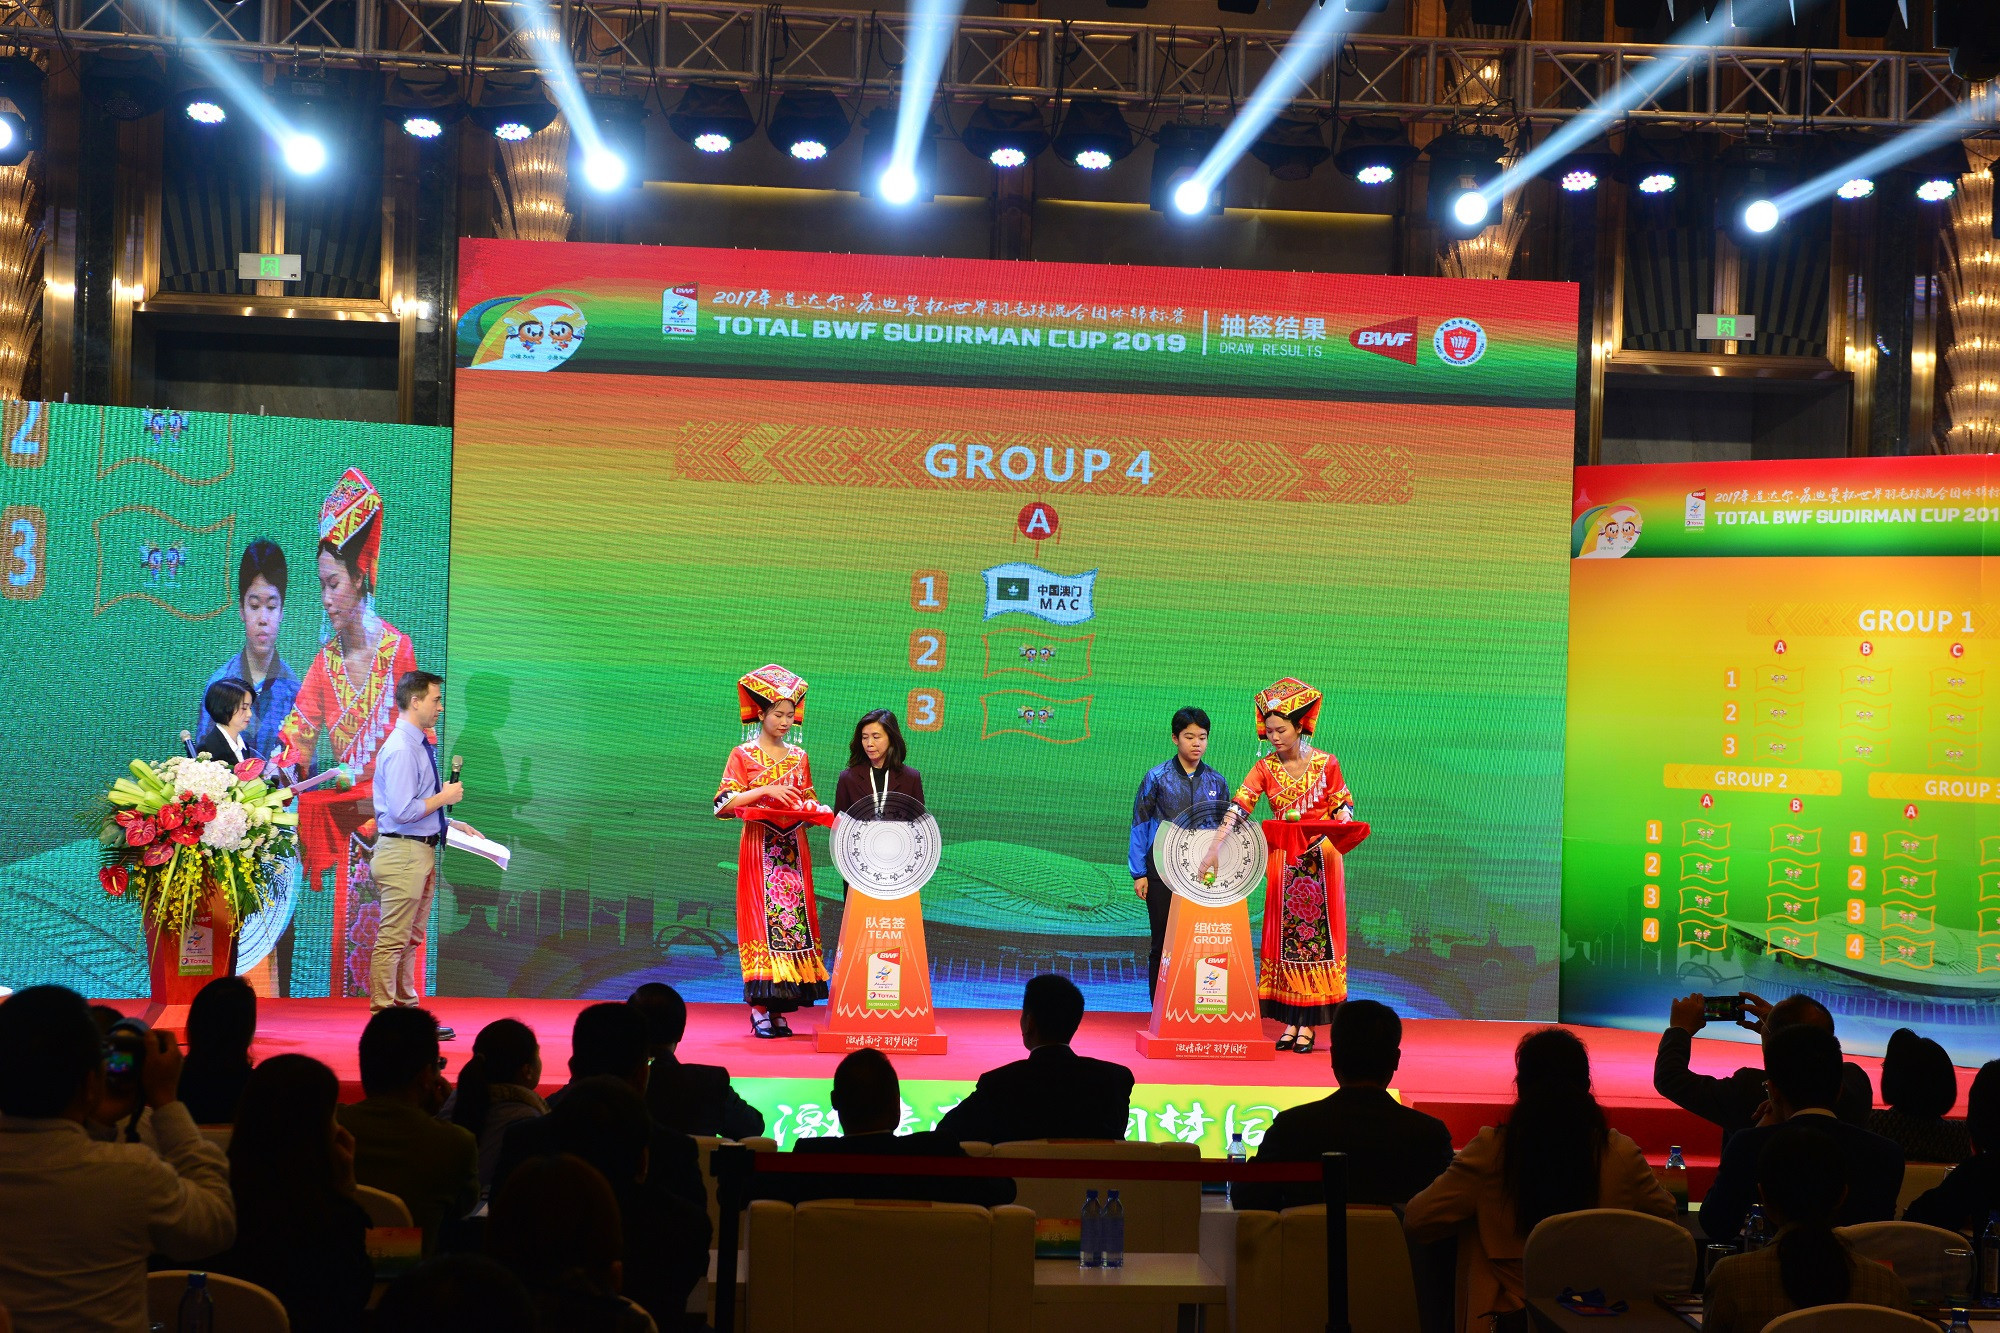 Hosts China handed tough draw in Sudirman Cup